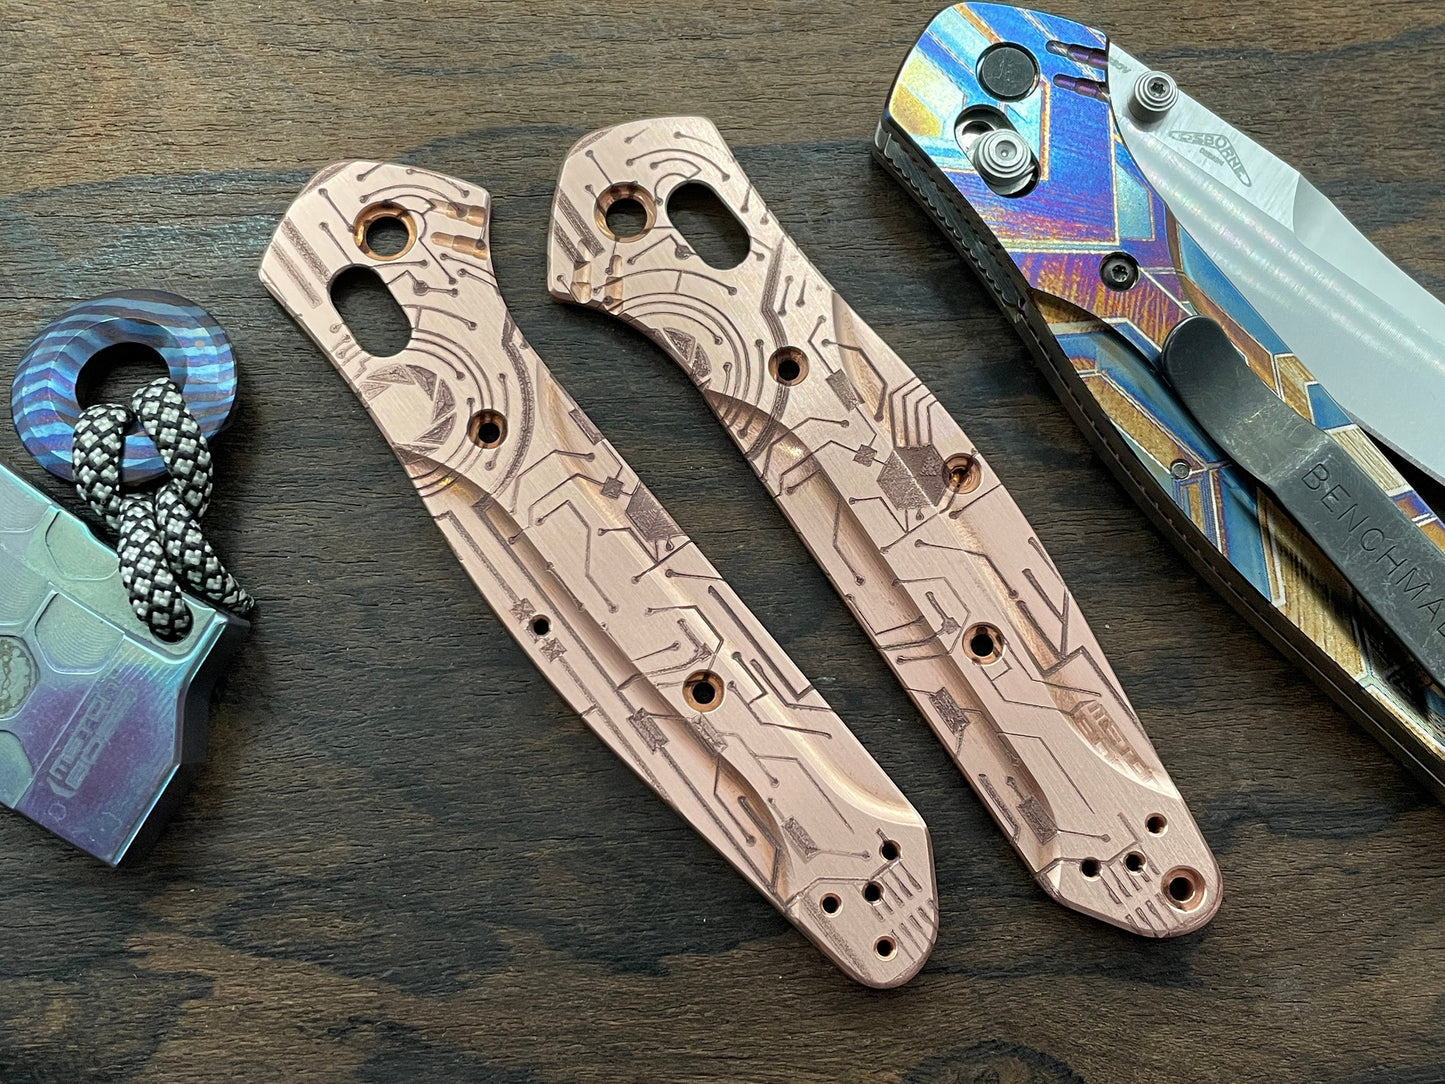 CIRCUIT BOARD engraved Copper Scales for Benchmade 940 Osborne